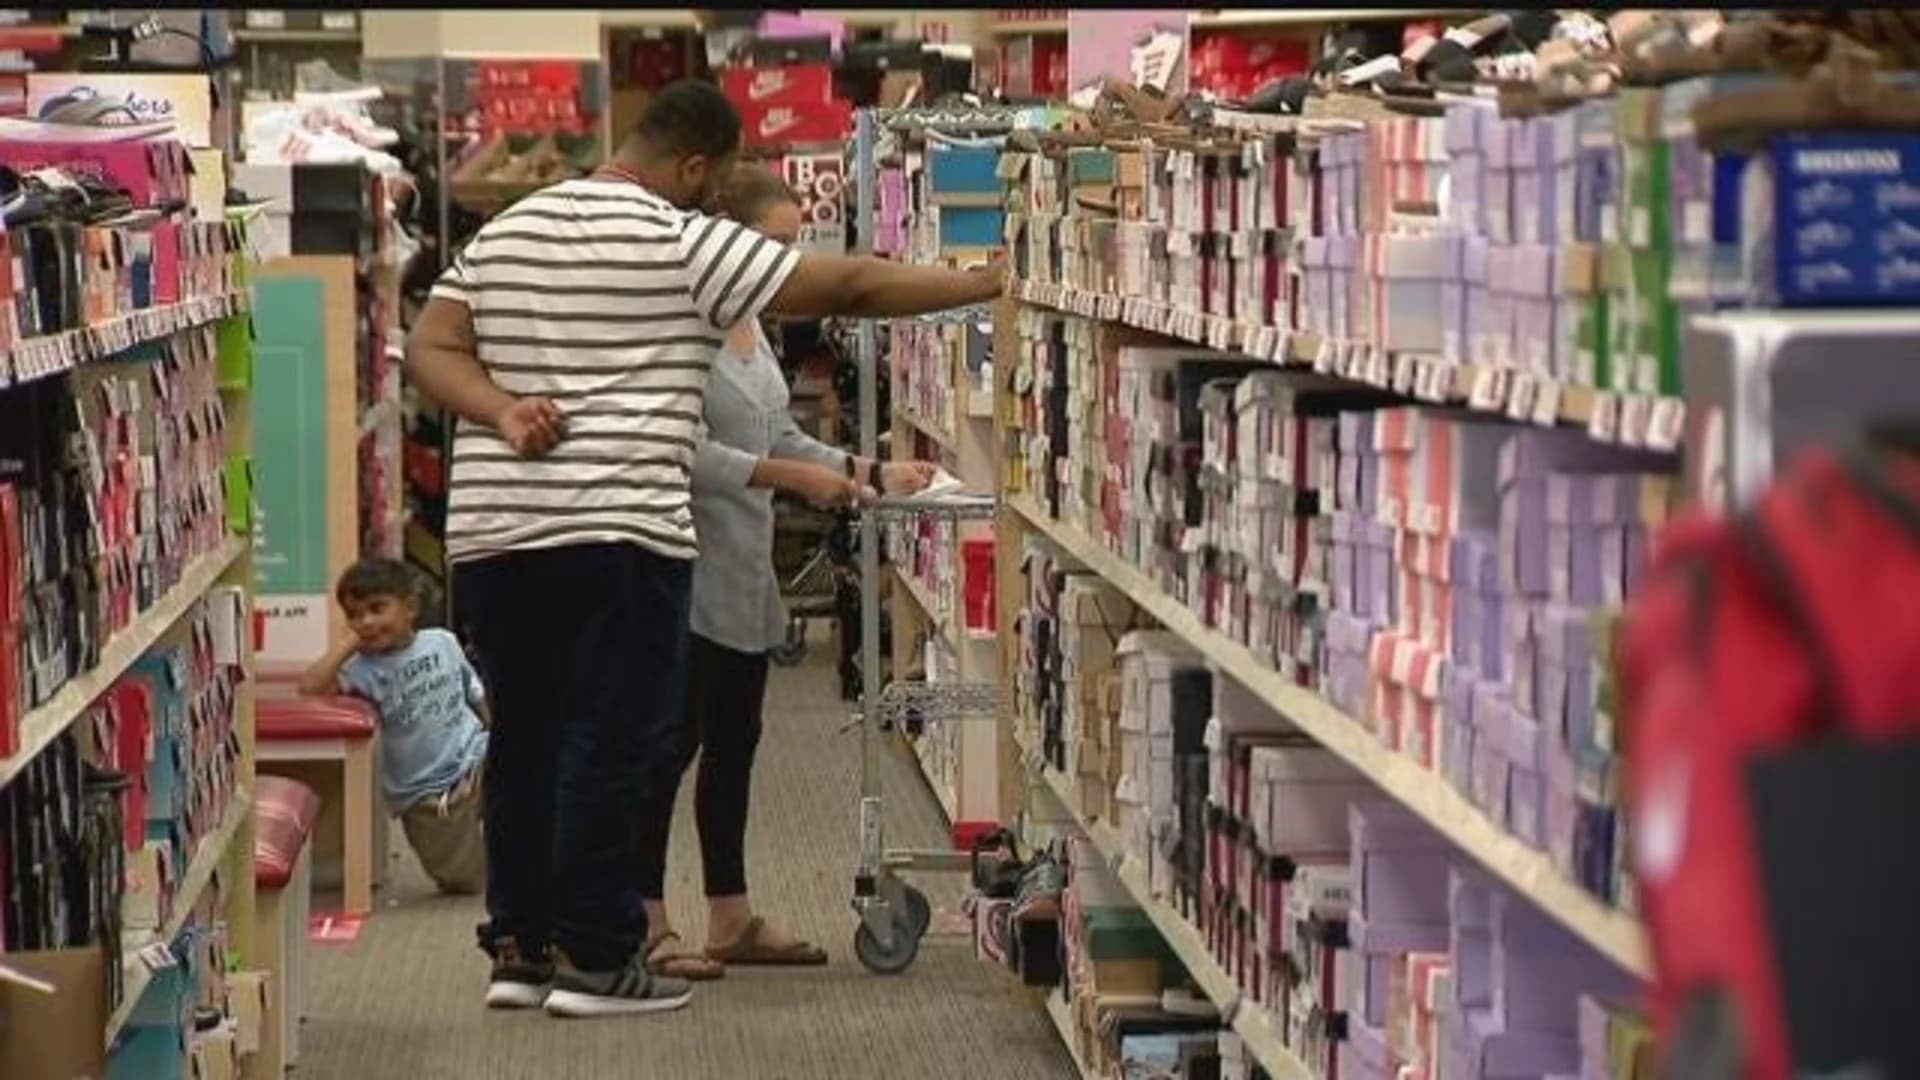 State estimates shoppers will save $4.9M during Tax Free Week